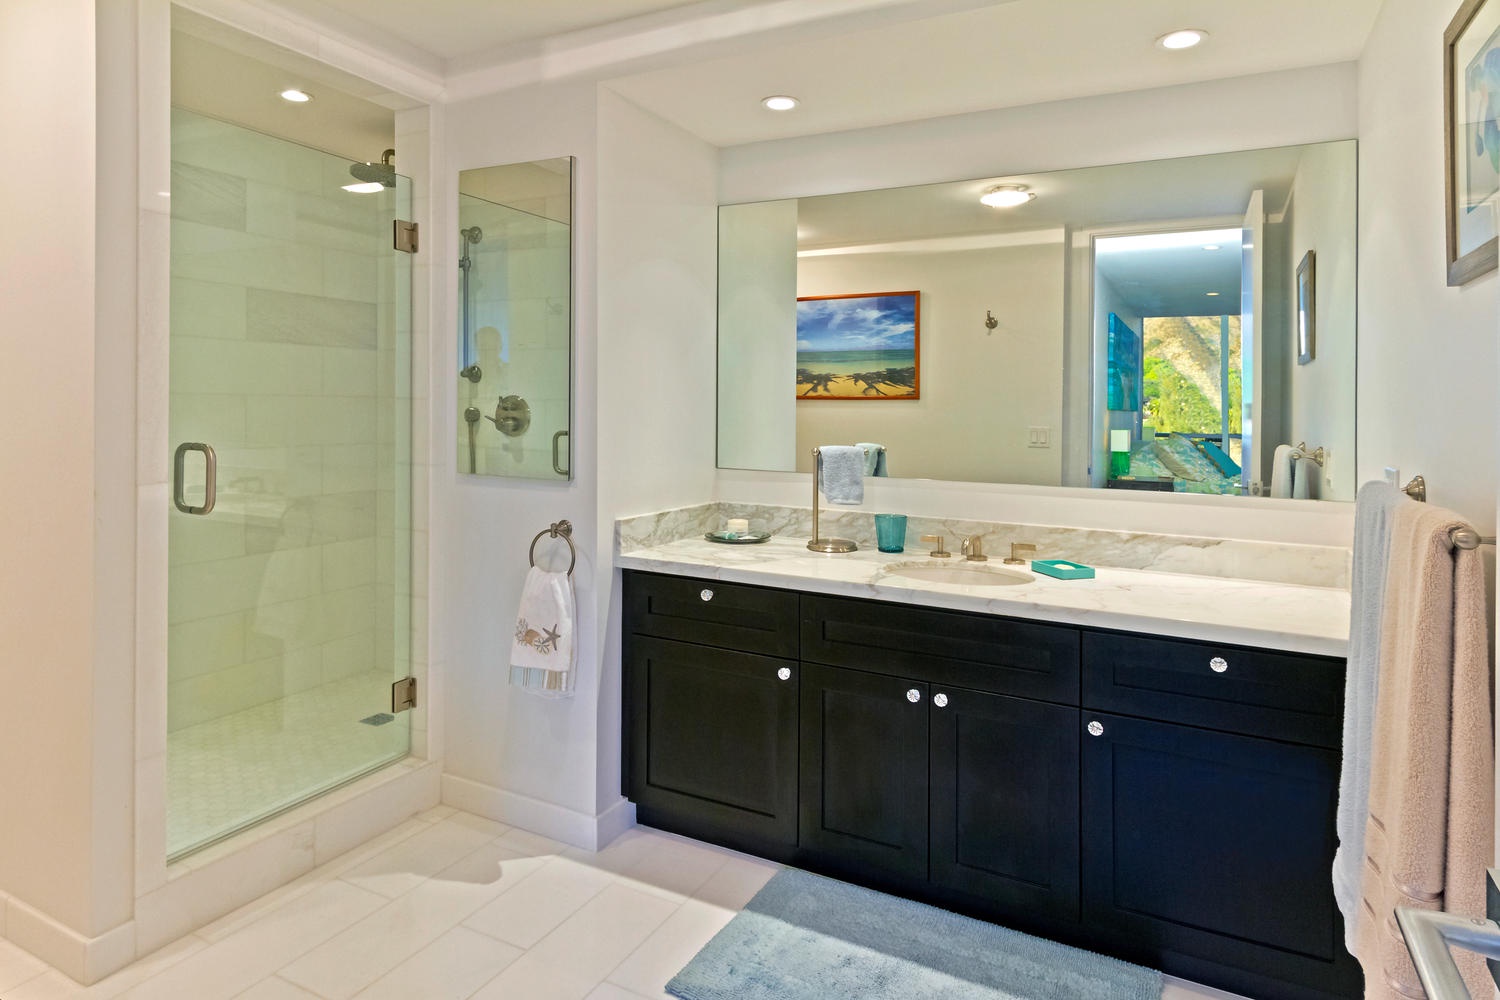 Honolulu Vacation Rentals, Executive Gold Coast Oceanfront Suite - Primary bathroom with dual shower heads.